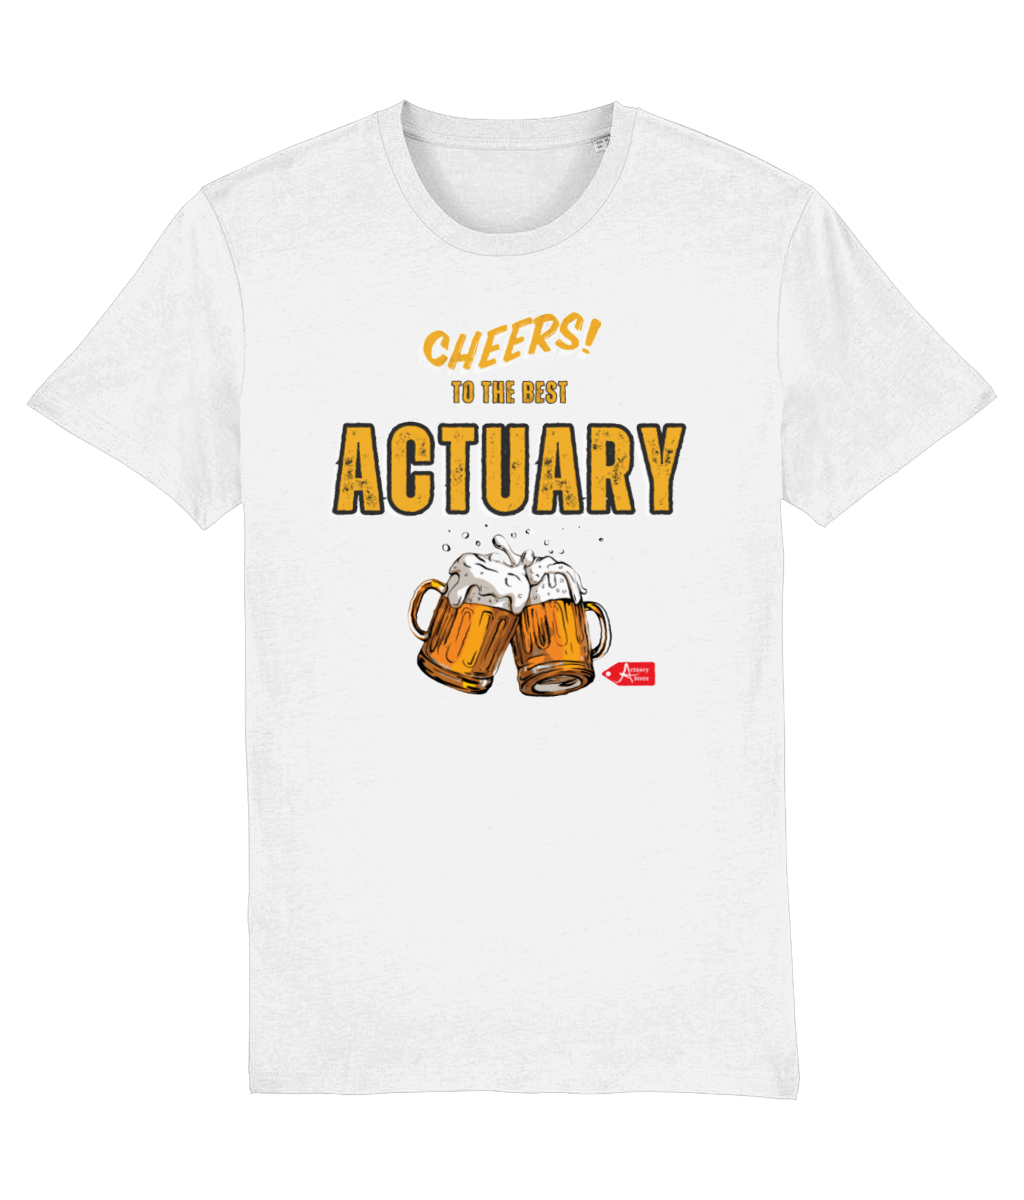 Cheers To The Best Actuary T-Shirt (Black and White Variants)